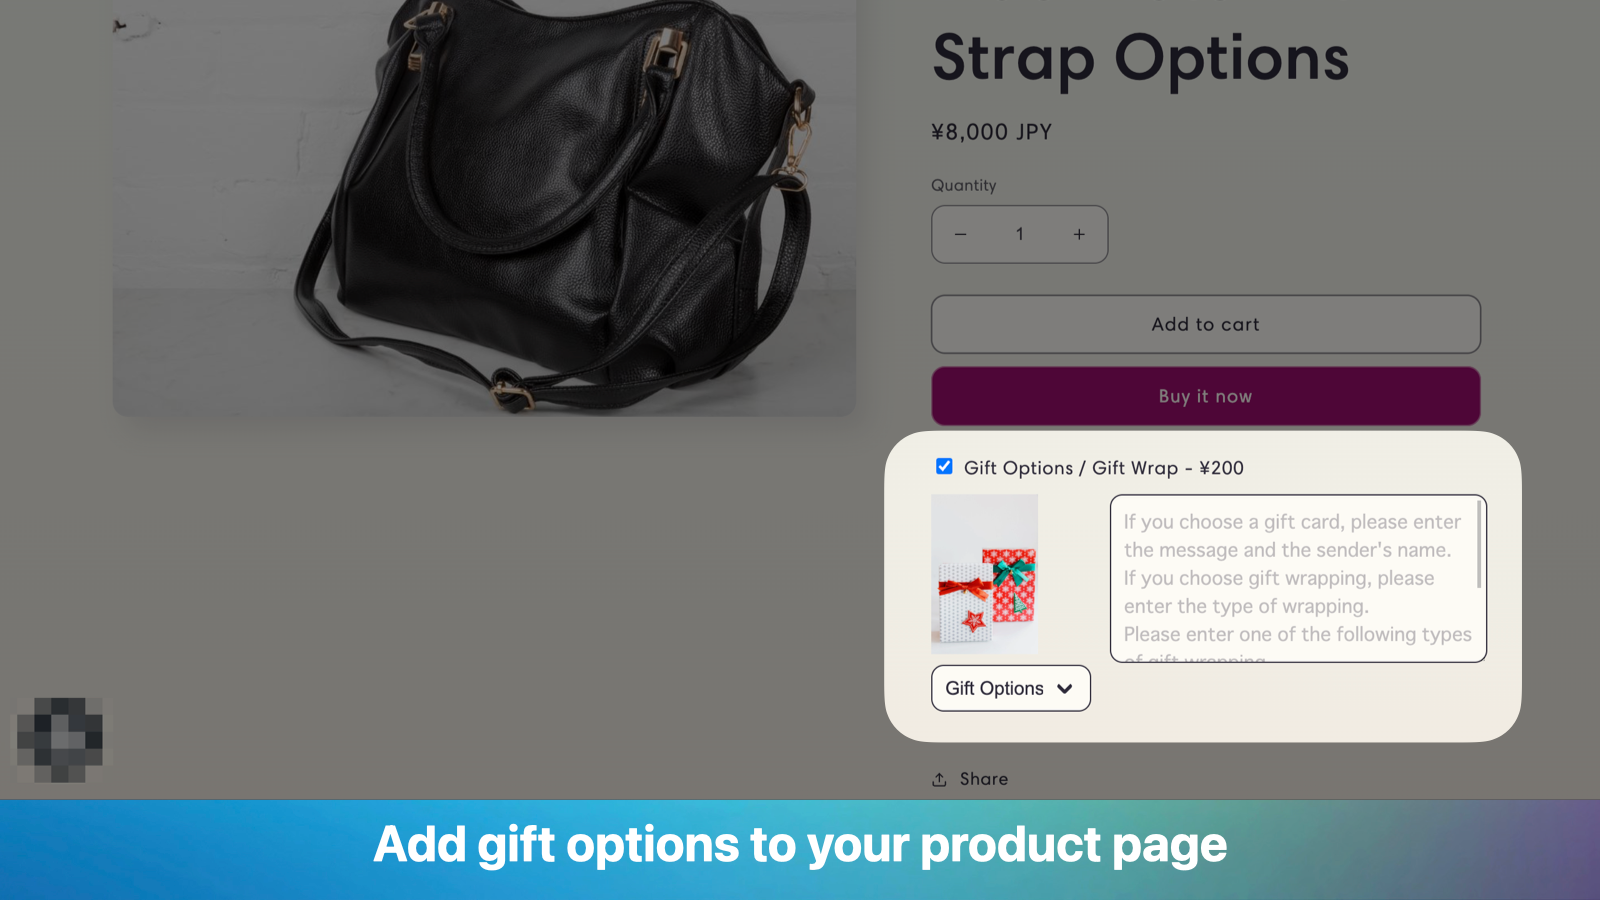 Add gift options to your product page